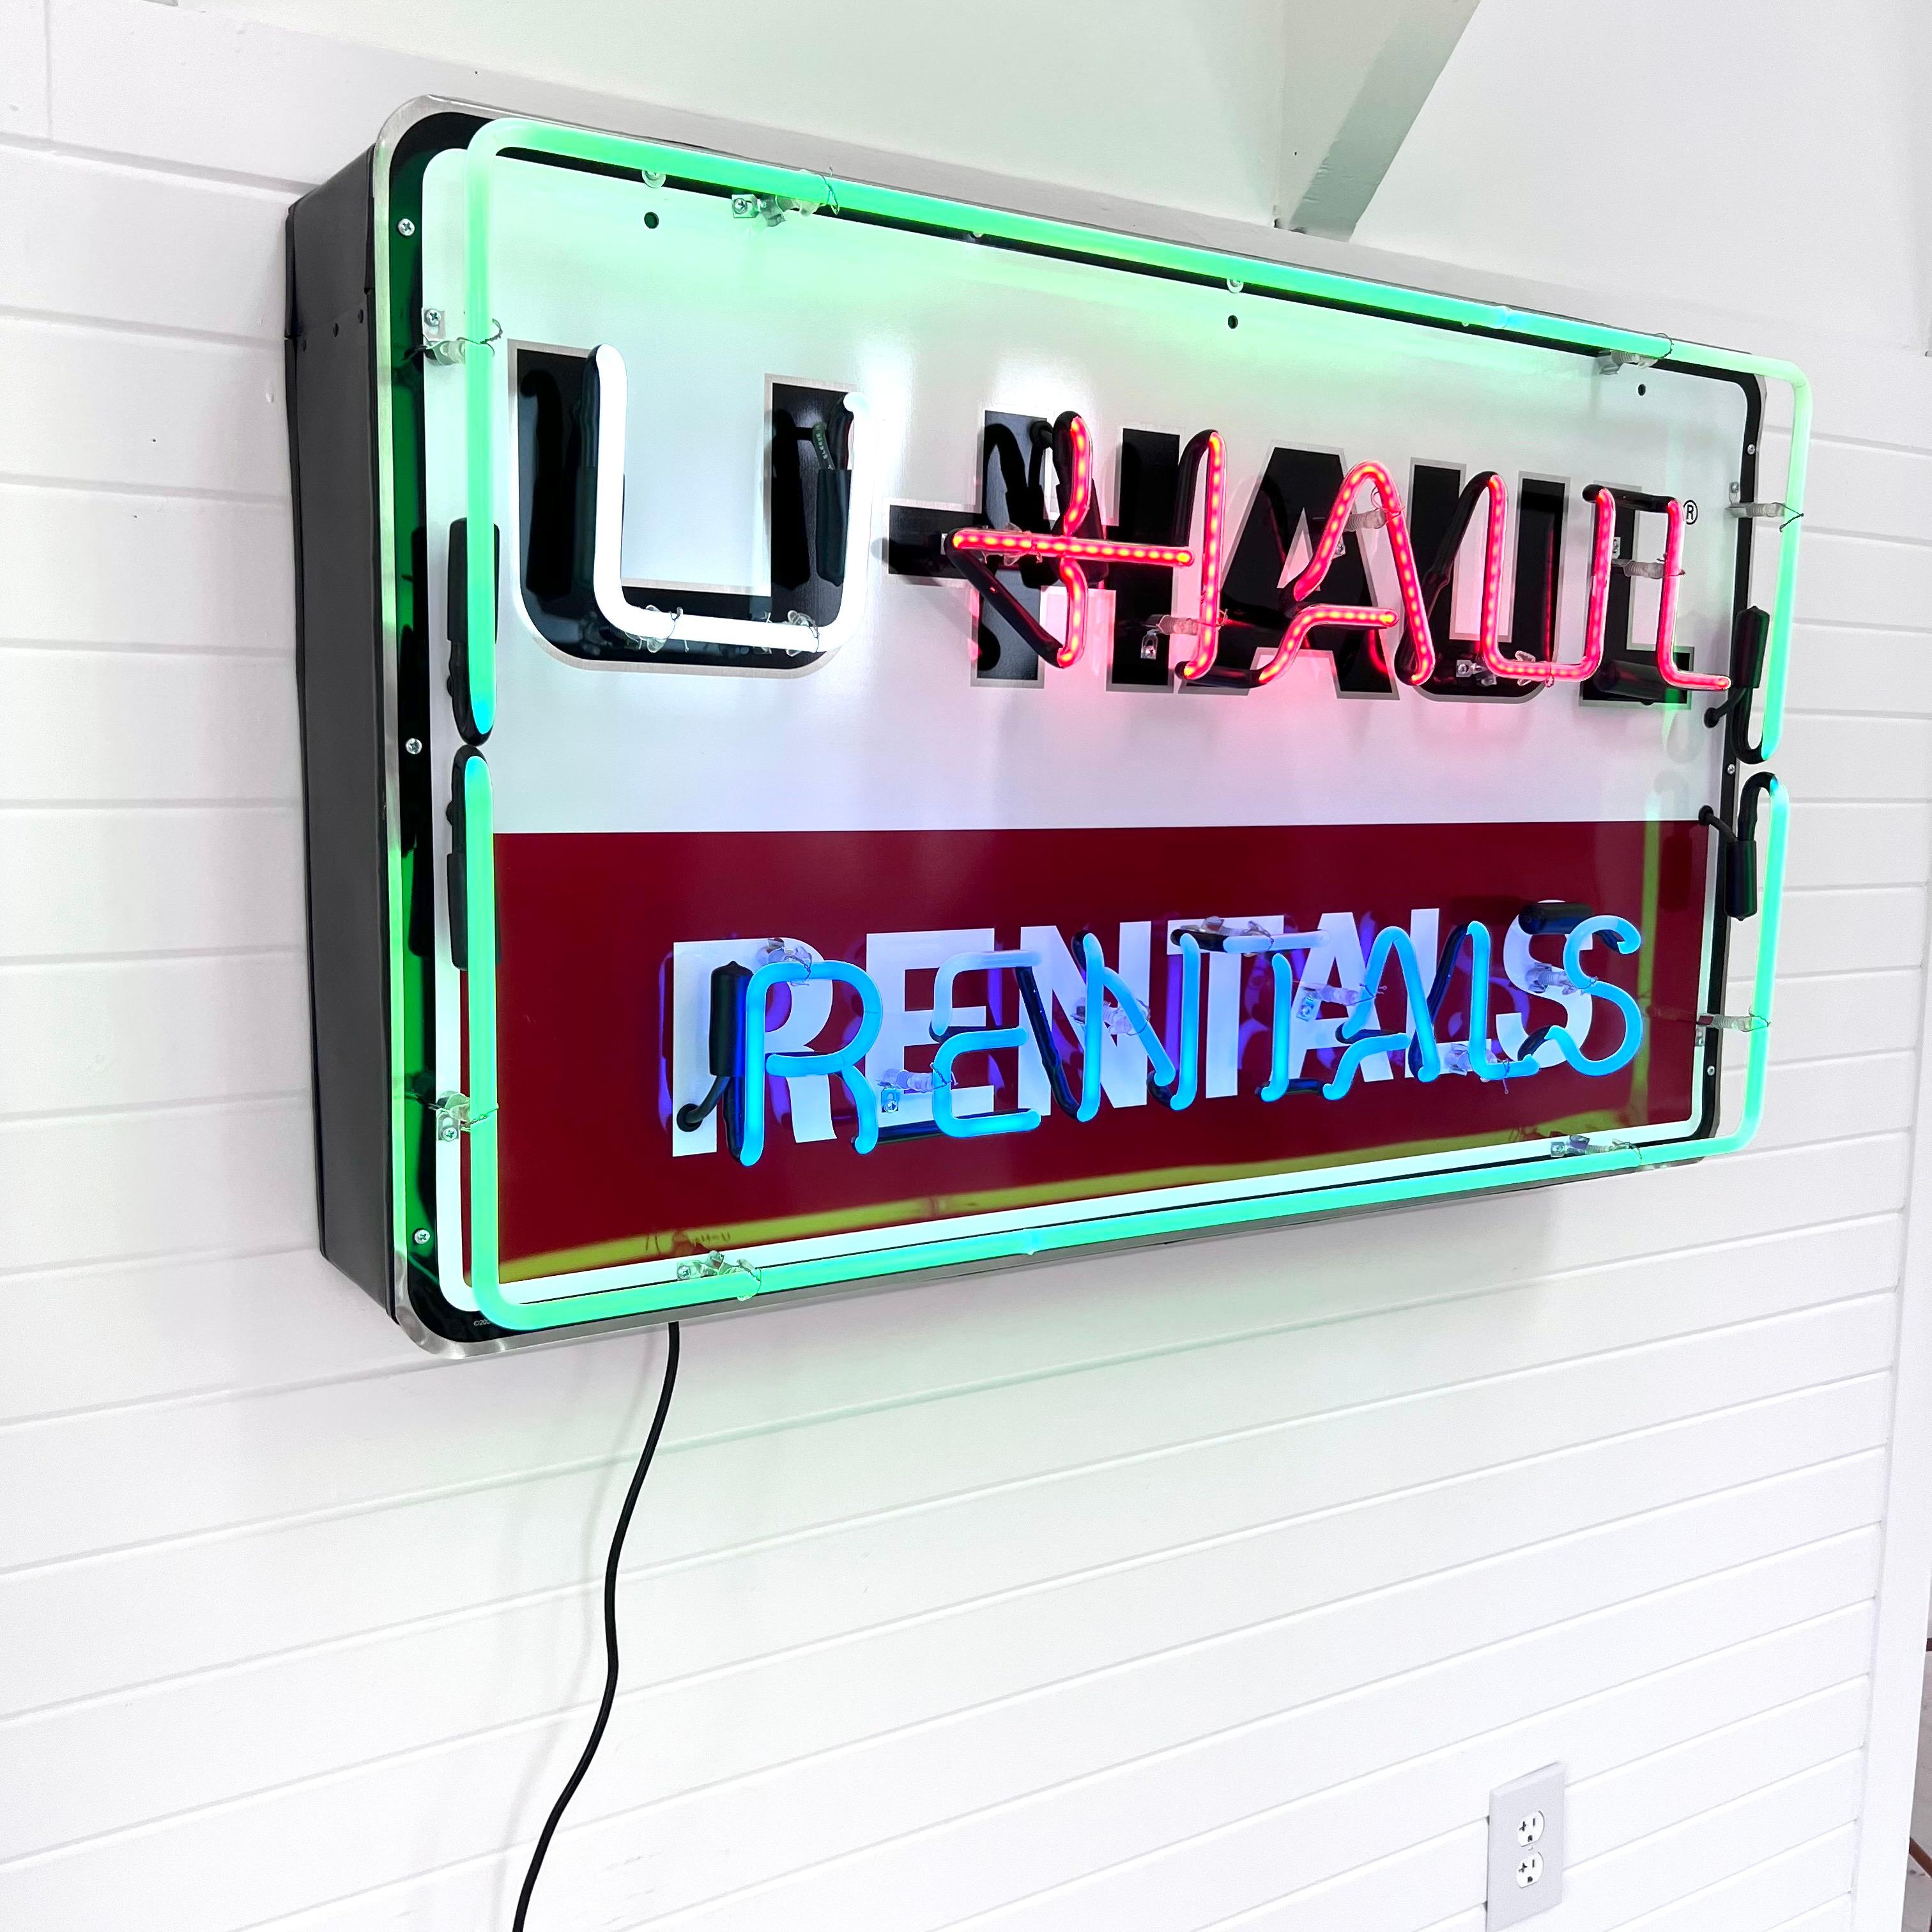 Vintage U-haul sign with newly added neon. U-haul company name against background of white over orange and four different colors of neon. High gloss shine with UV protection. Brand new neon glass, transformer and GTO wiring on a die-cut metal can